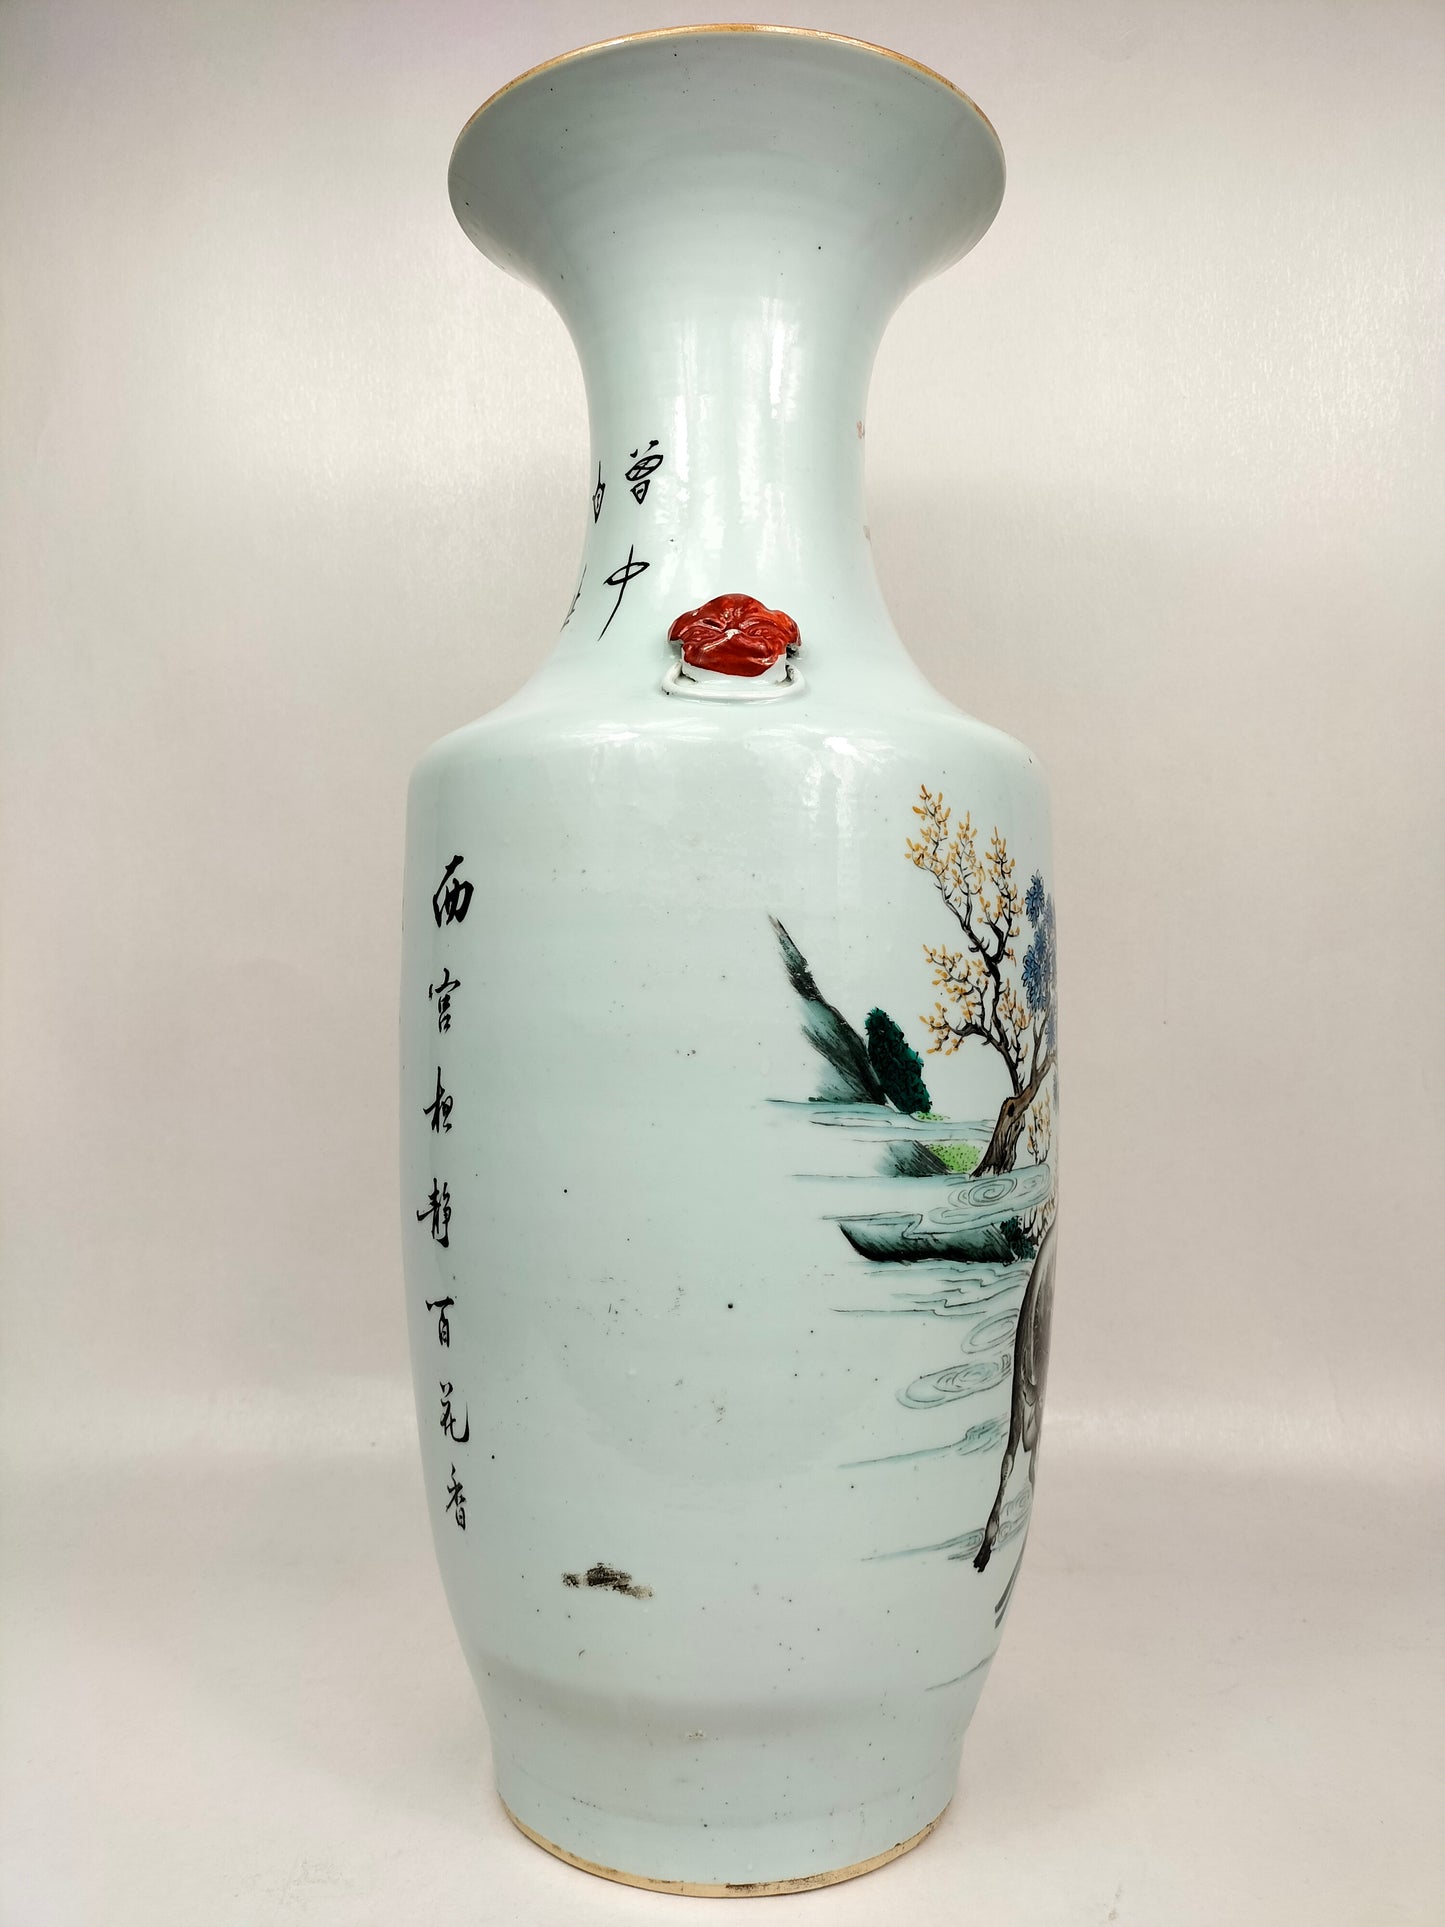 Large antique Chinese vase decorated with figures and water buffalo // Republic Period (1912-1949)